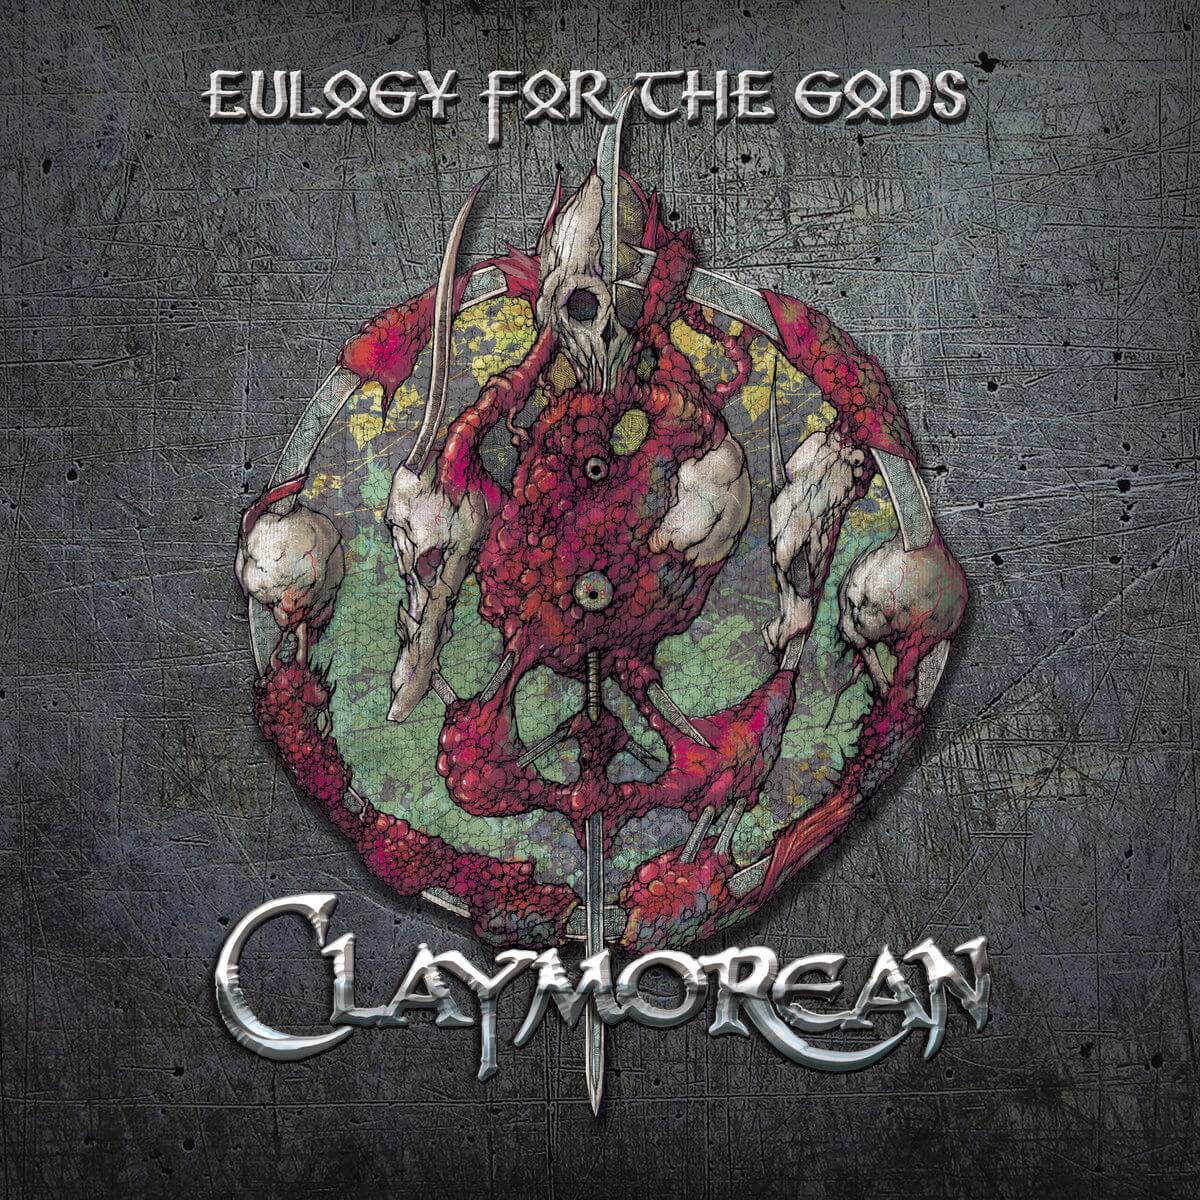 Claymorean : "Eulogy for The Gods" CD & LP 2020 - 2021 Stormspell Records and others..